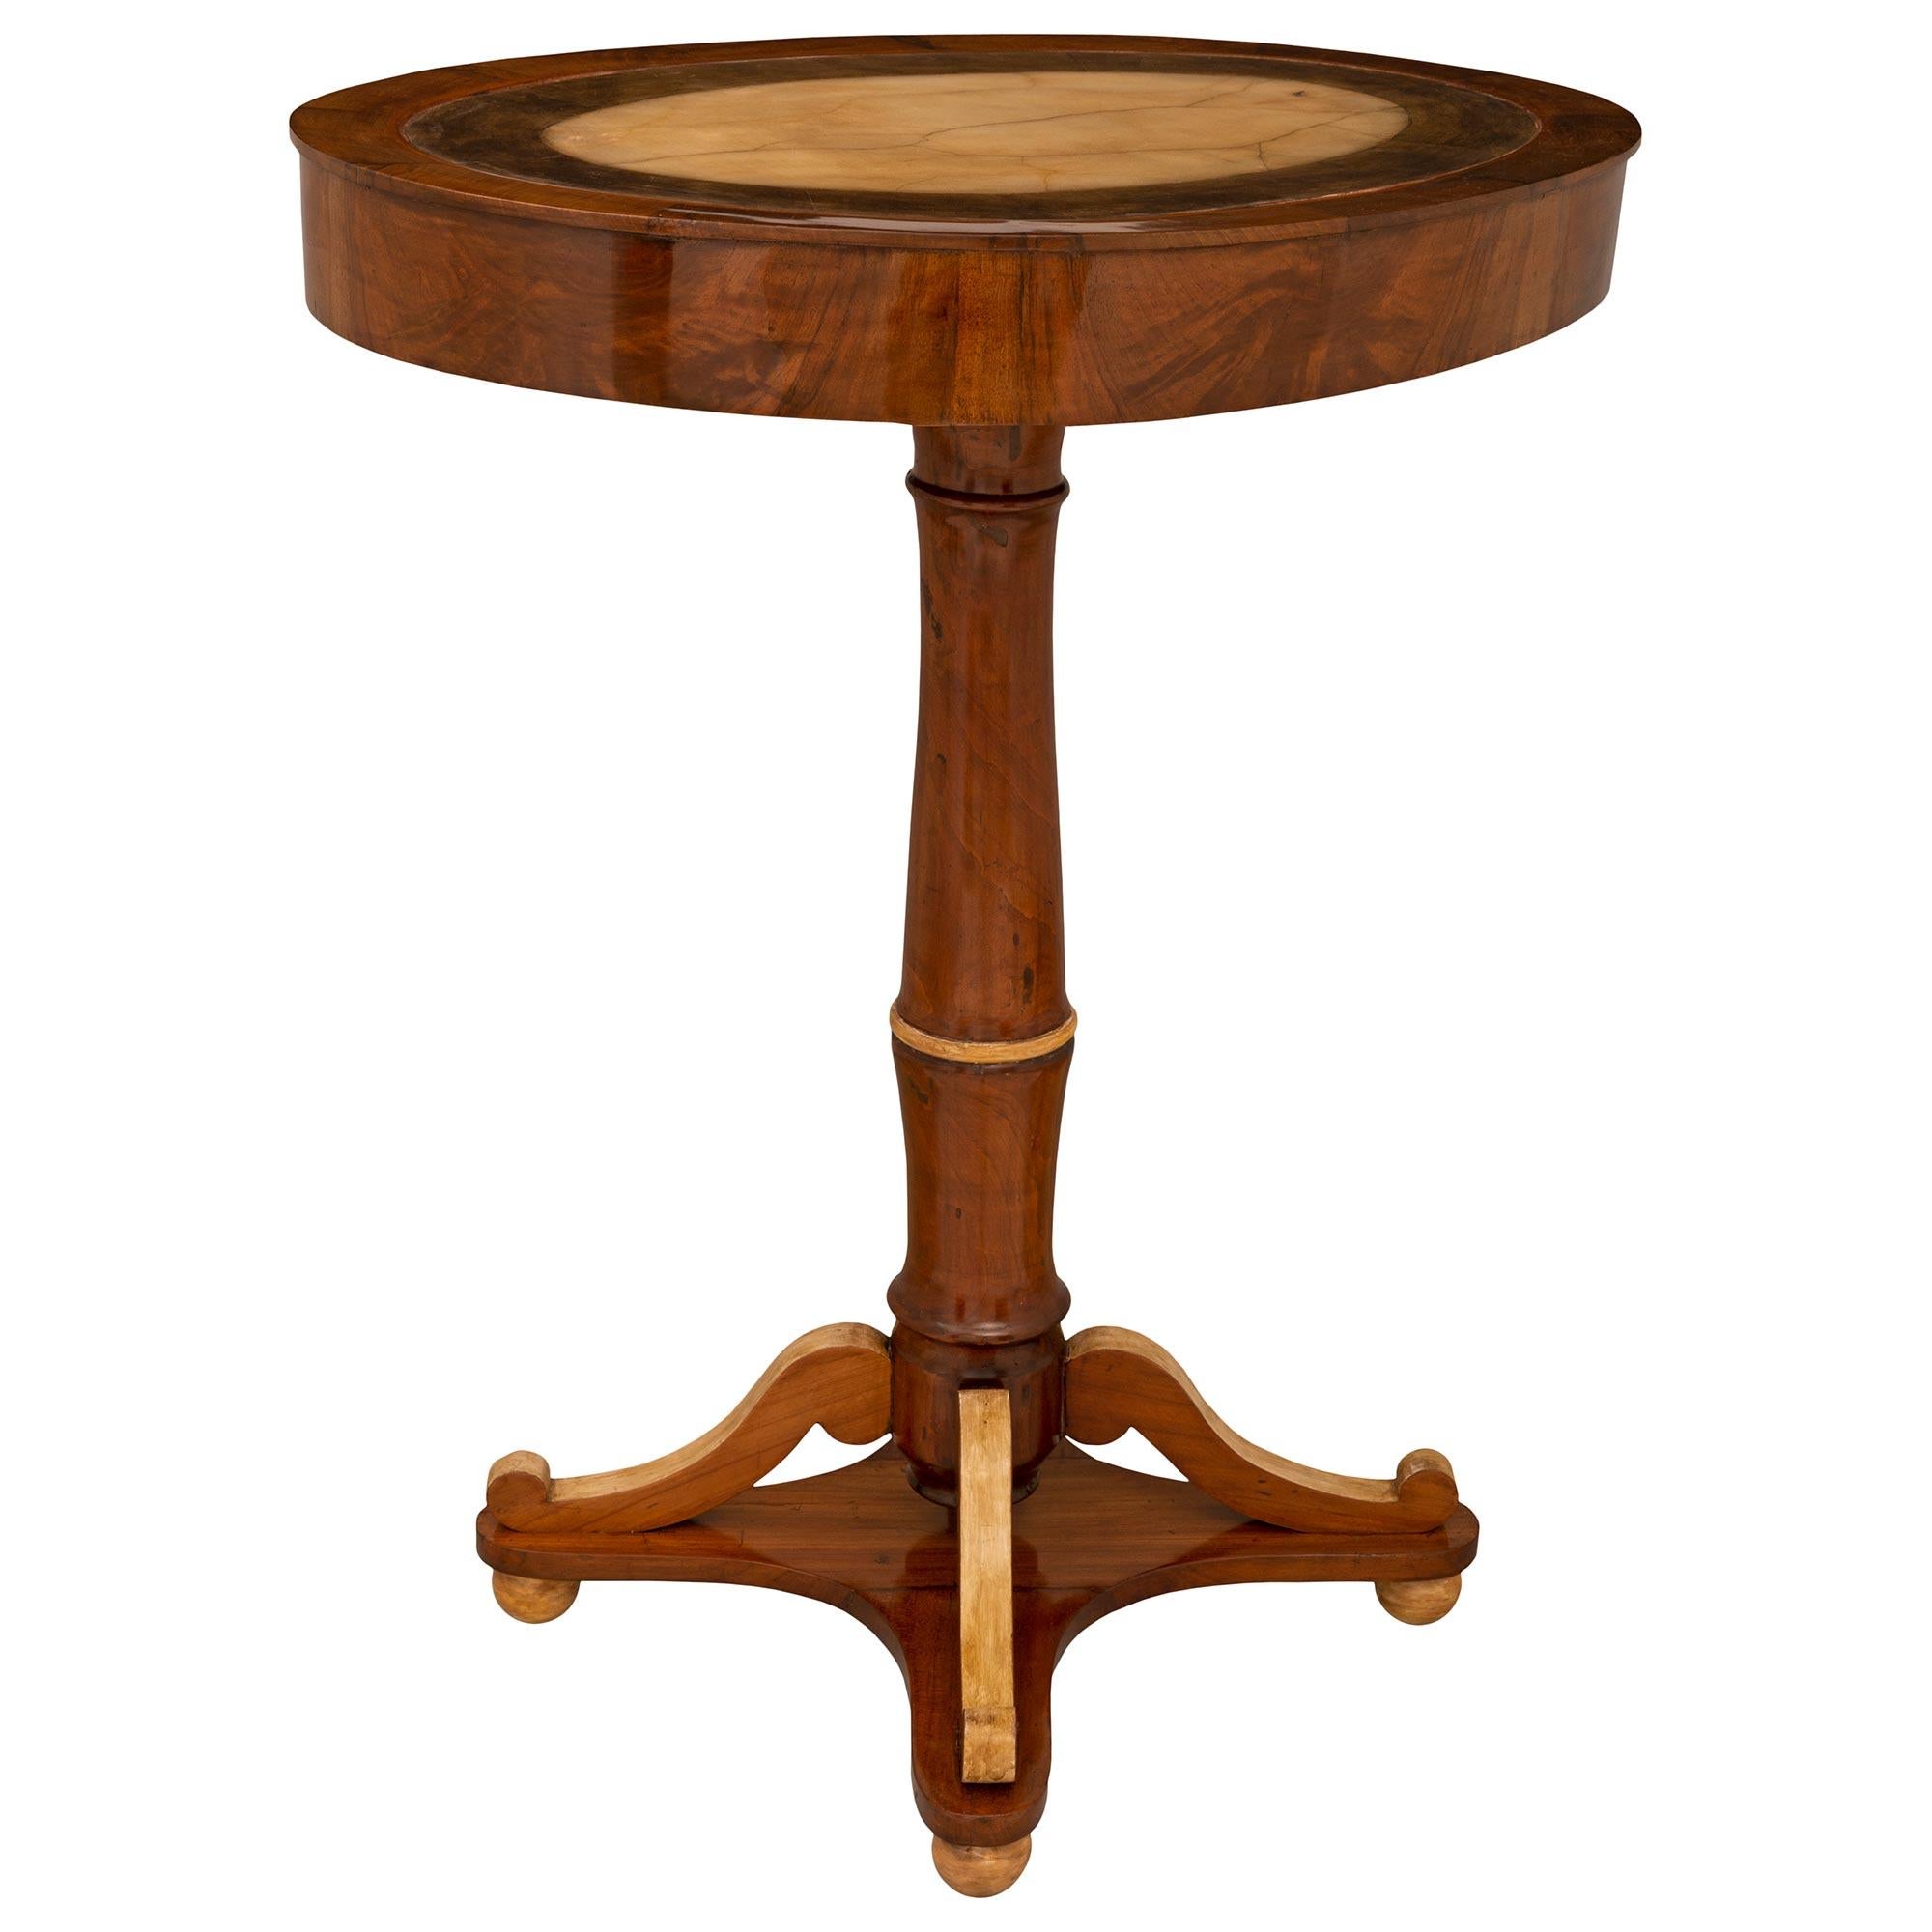 Italian 18th Century Tuscan St. Walnut, Patinated Wood And Onyx Side Table In Good Condition For Sale In West Palm Beach, FL